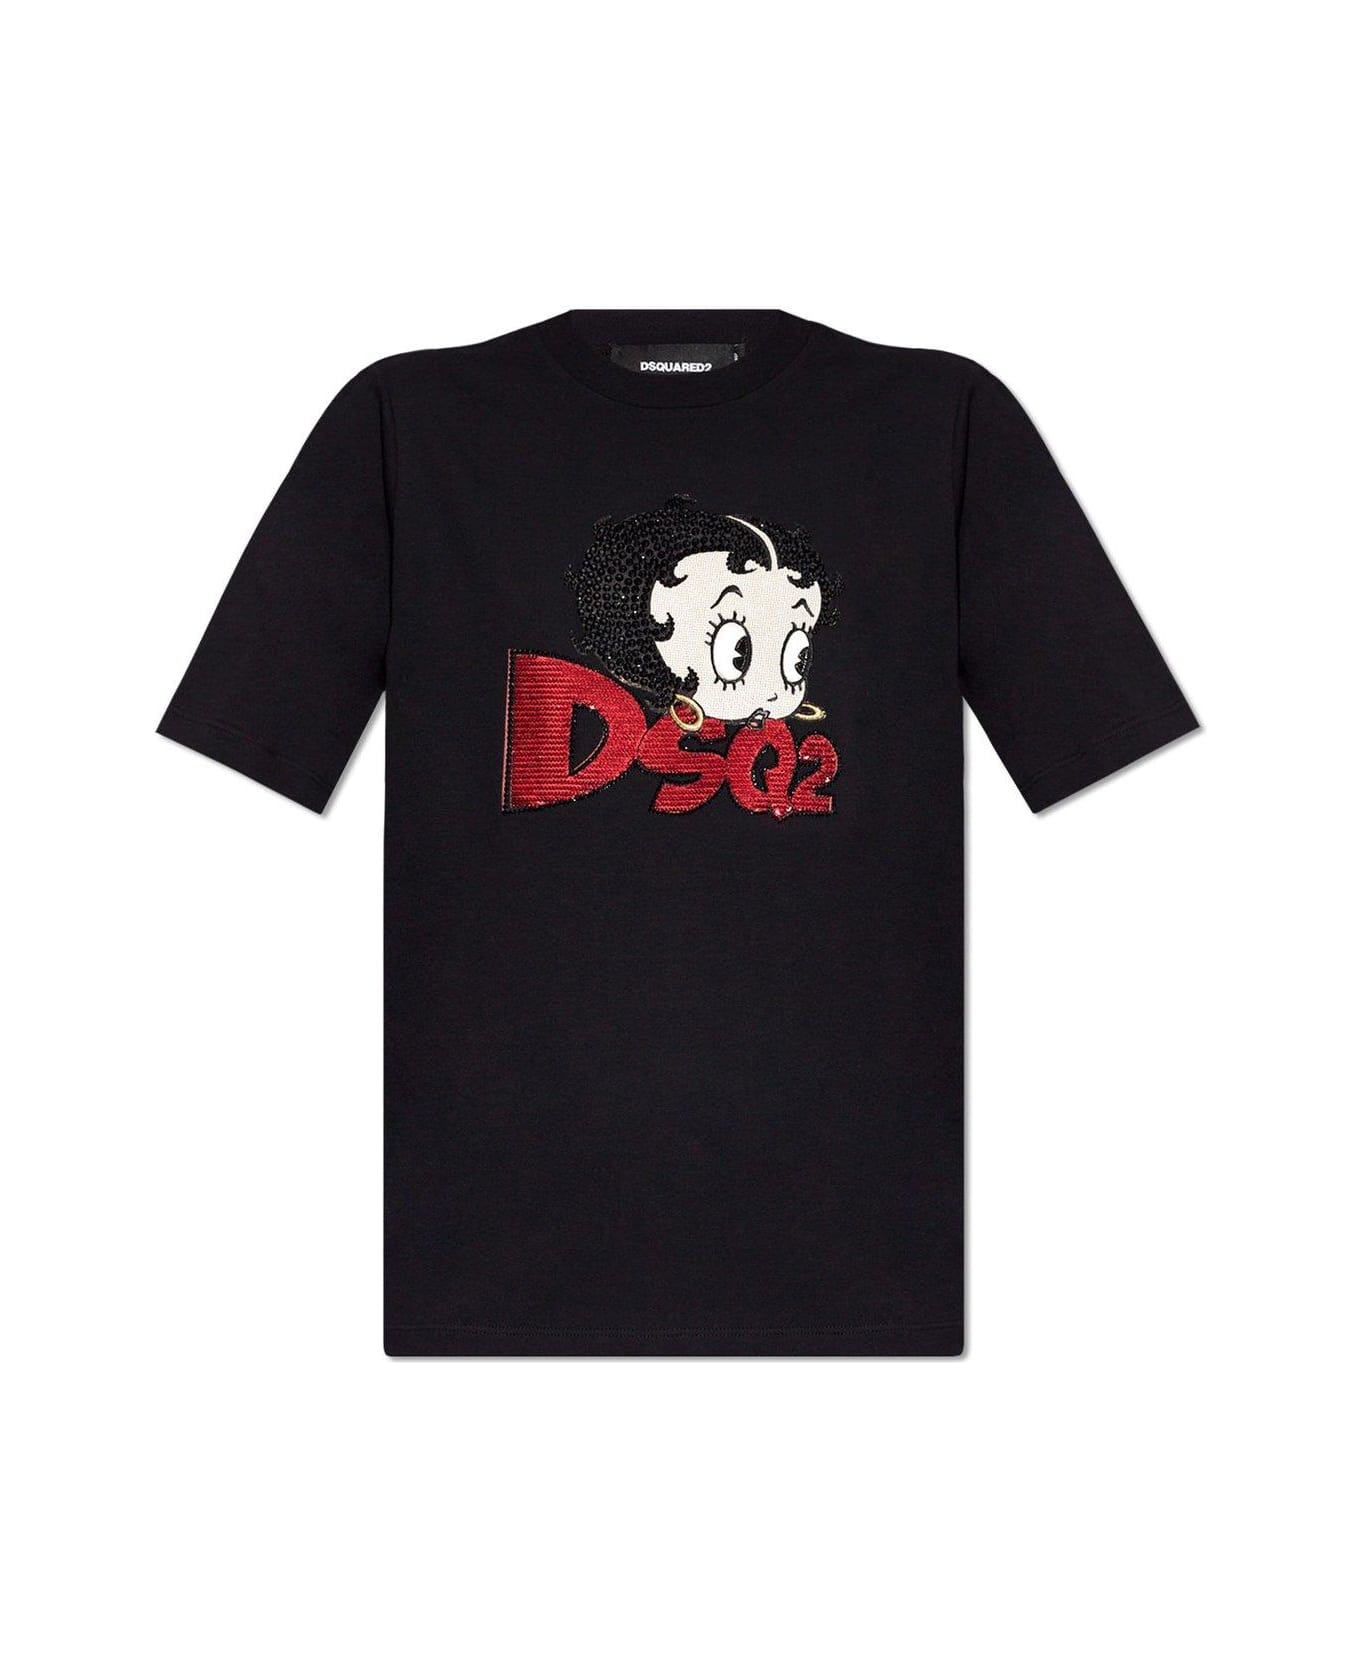 Dsquared2 Betty Boop Sequin Embellished T-shirt - Black Tシャツ